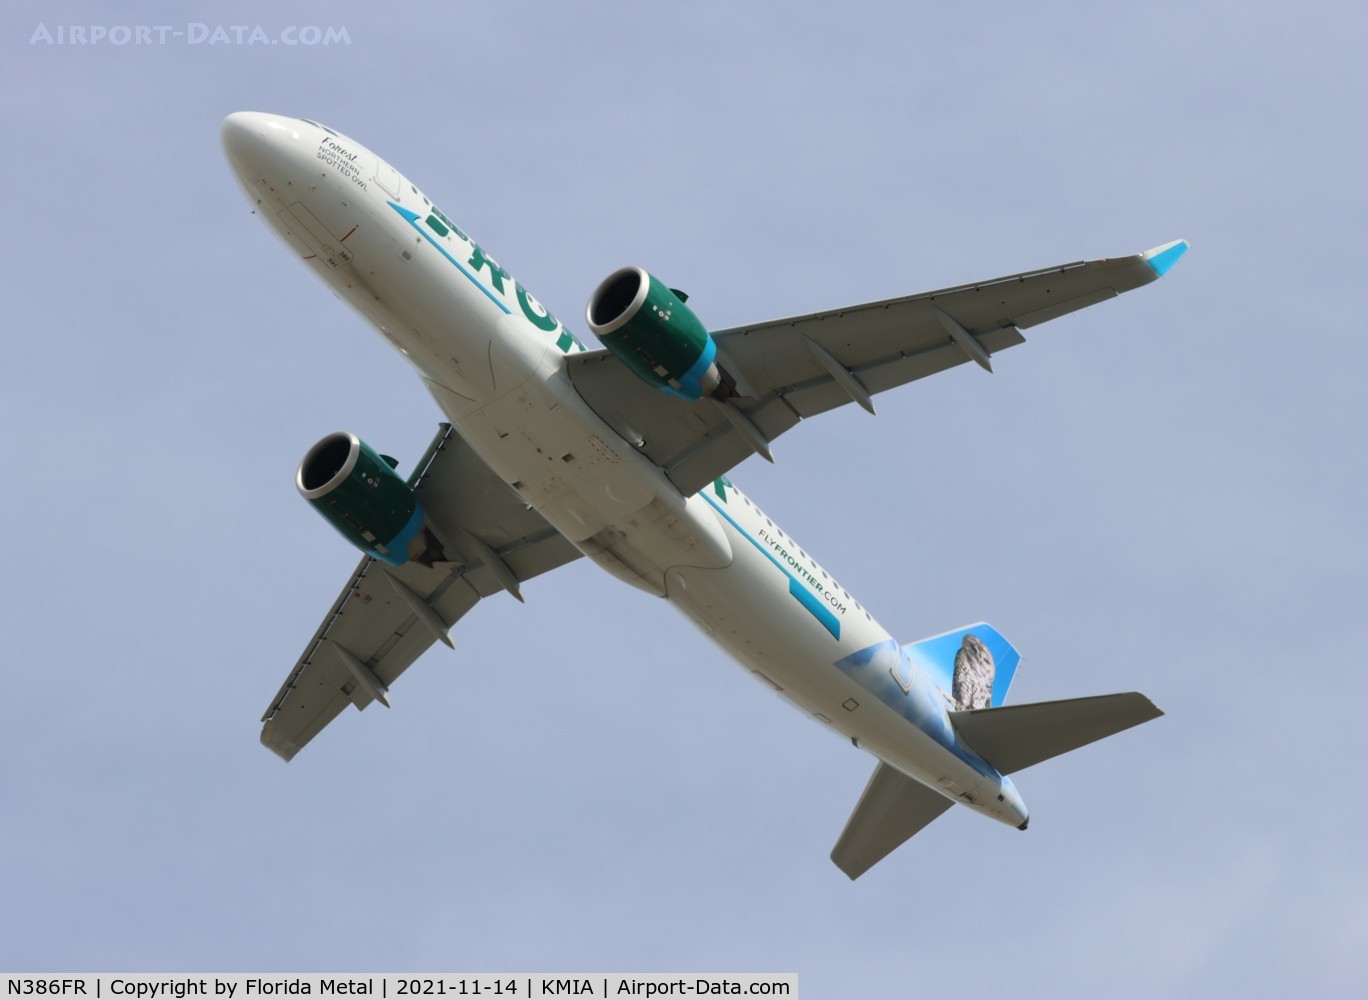 N386FR, 2021 Airbus A320-251NEO C/N 10642, Forest the Northern Spotted Owl